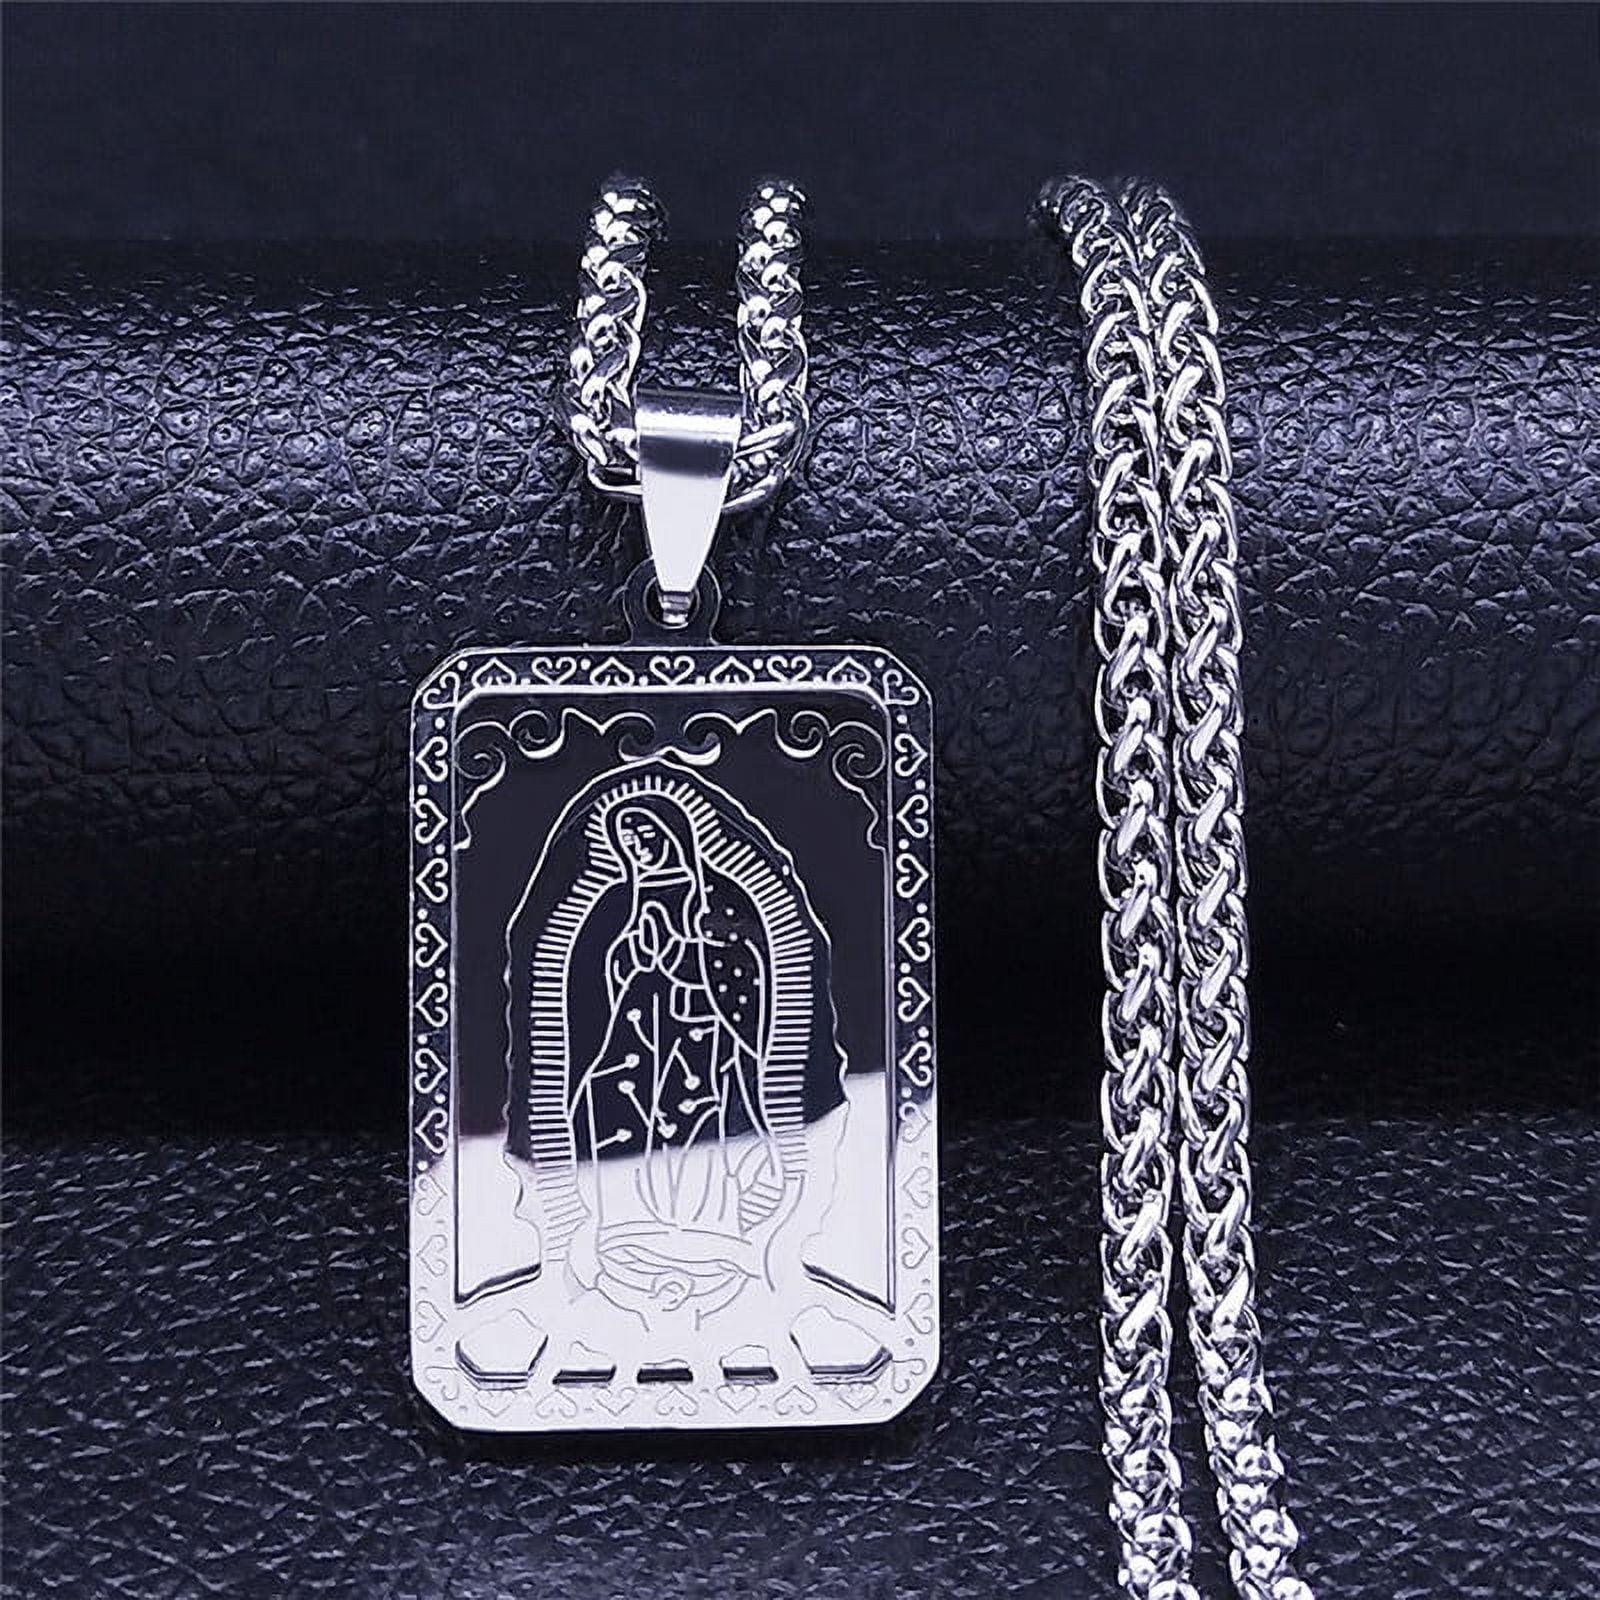 One Square TAG Virgin Mary Prayer Necklace Women Men Stainless Steel Gold Medal Necklace bb0d70d7 b181 4546 92c7 4bcc0074ca39.dbf00ad5f8a03a94fe4ecb6063299fba